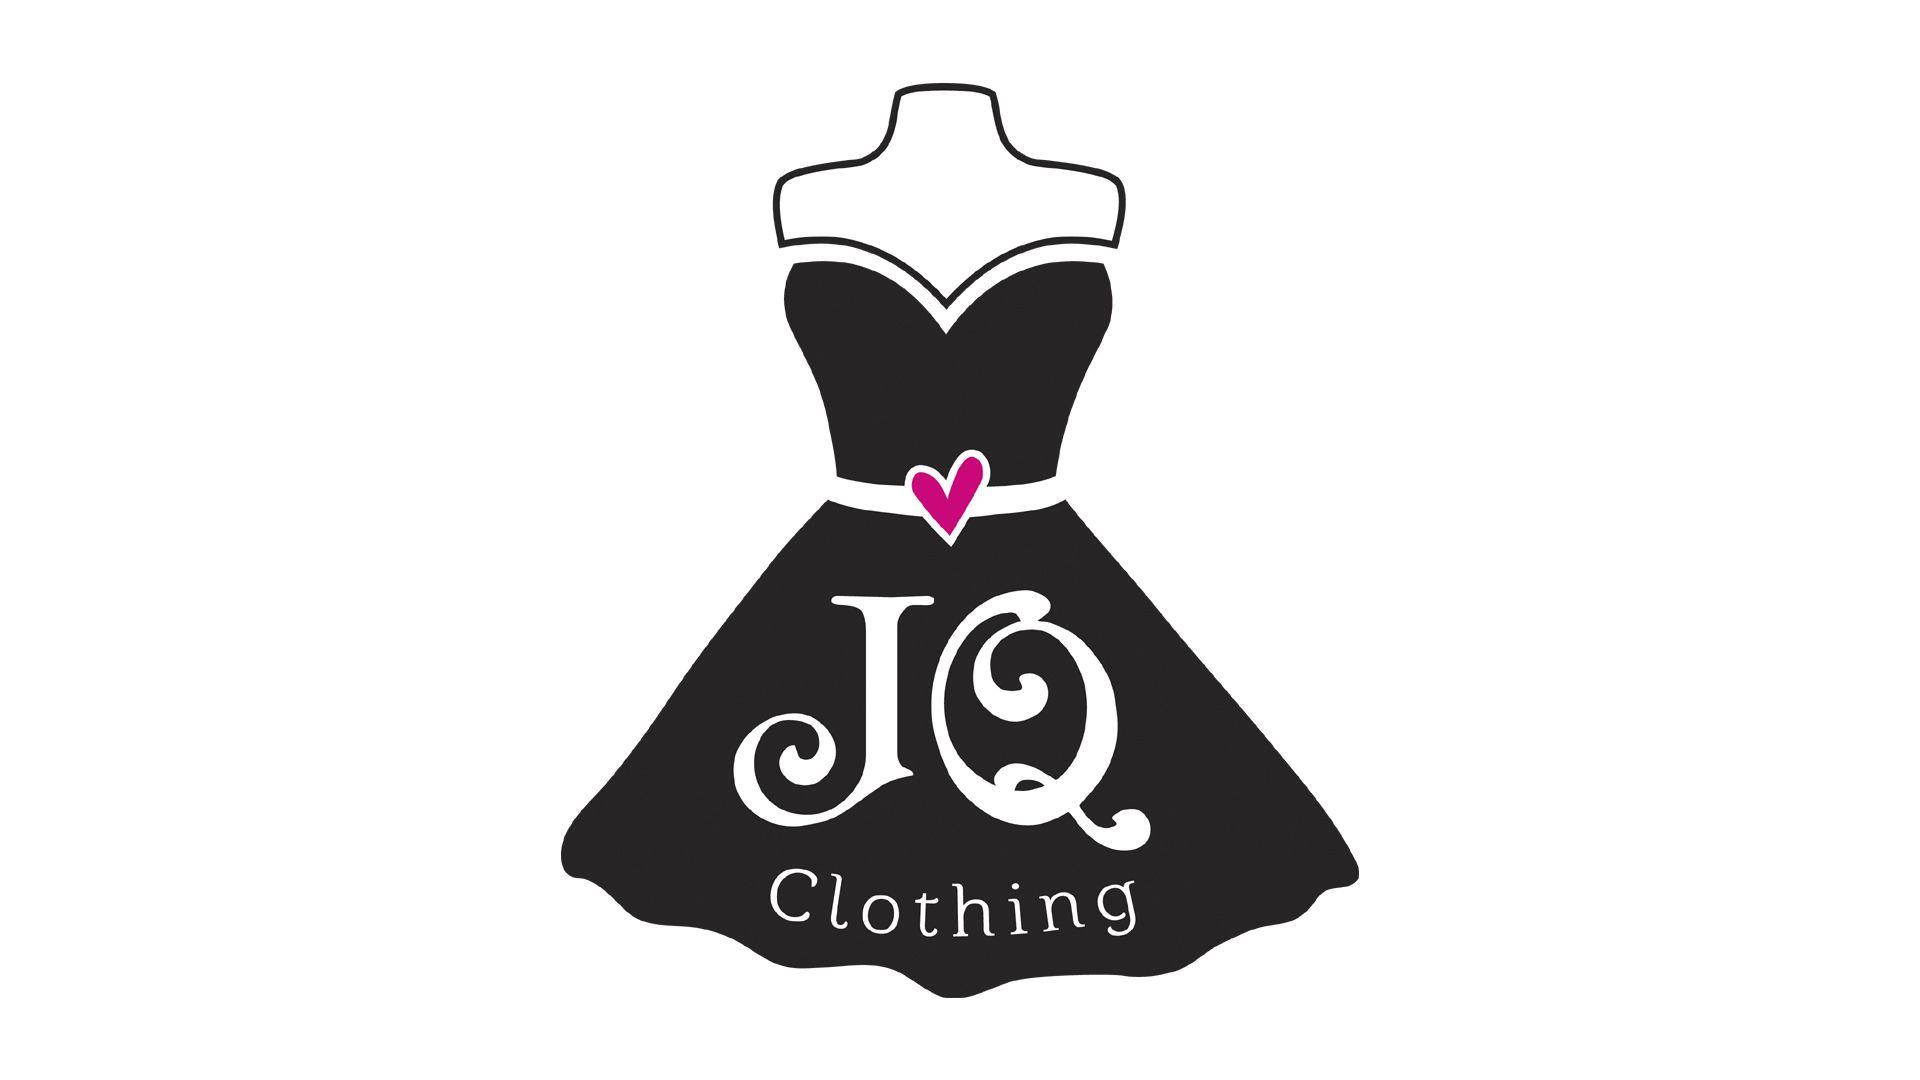 Dress Clothing Logo - JQ Clothing Ltd. – 16 Years of Love, Laughter and Acceptance.